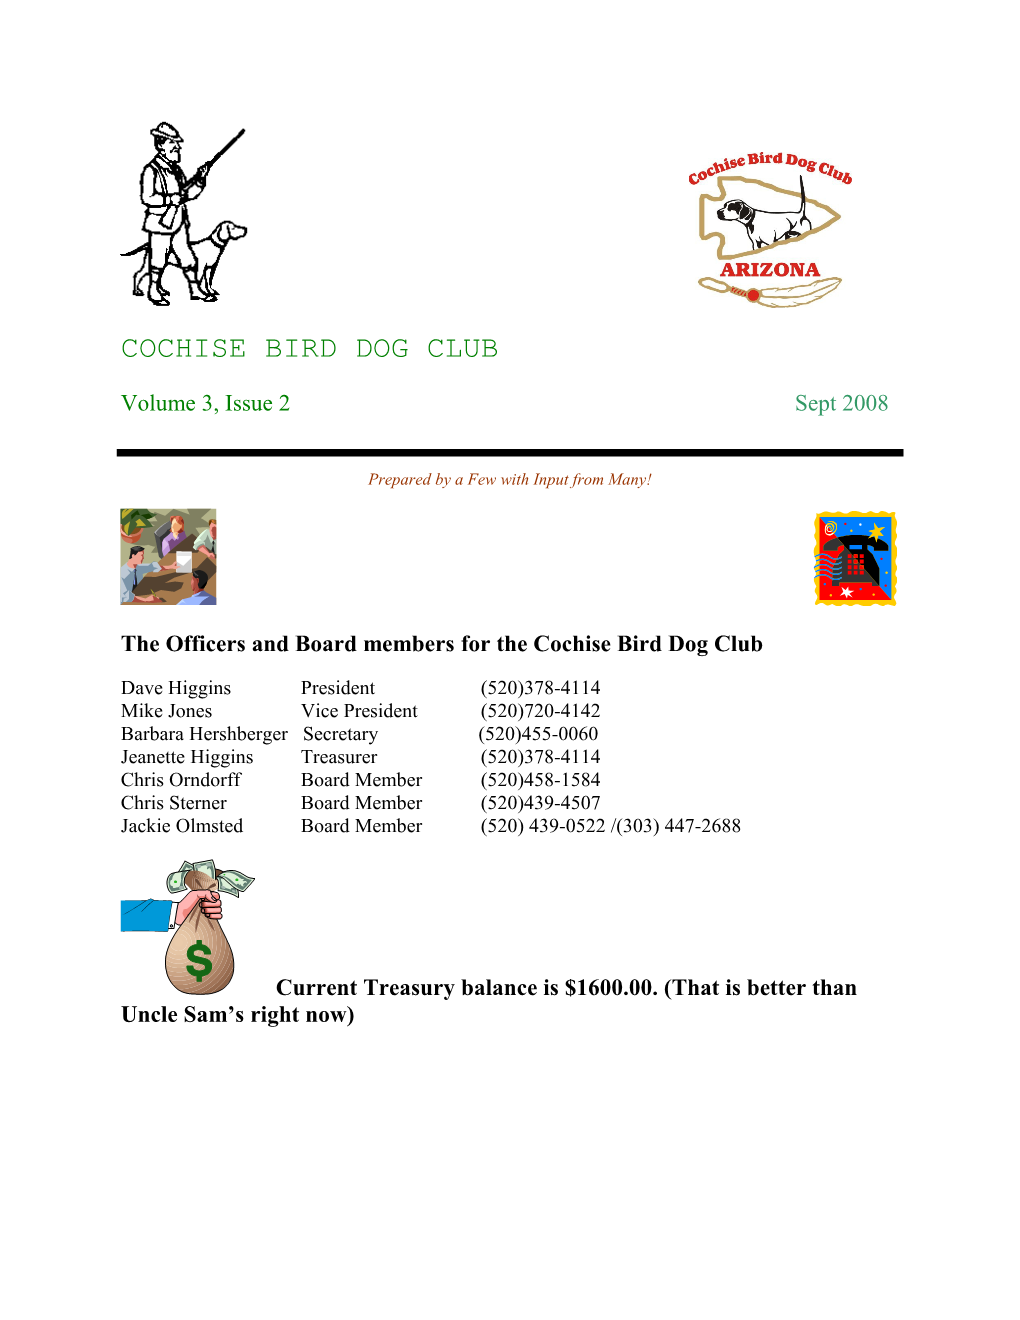 The Officers and Board Members for the Cochise Bird Dog Club